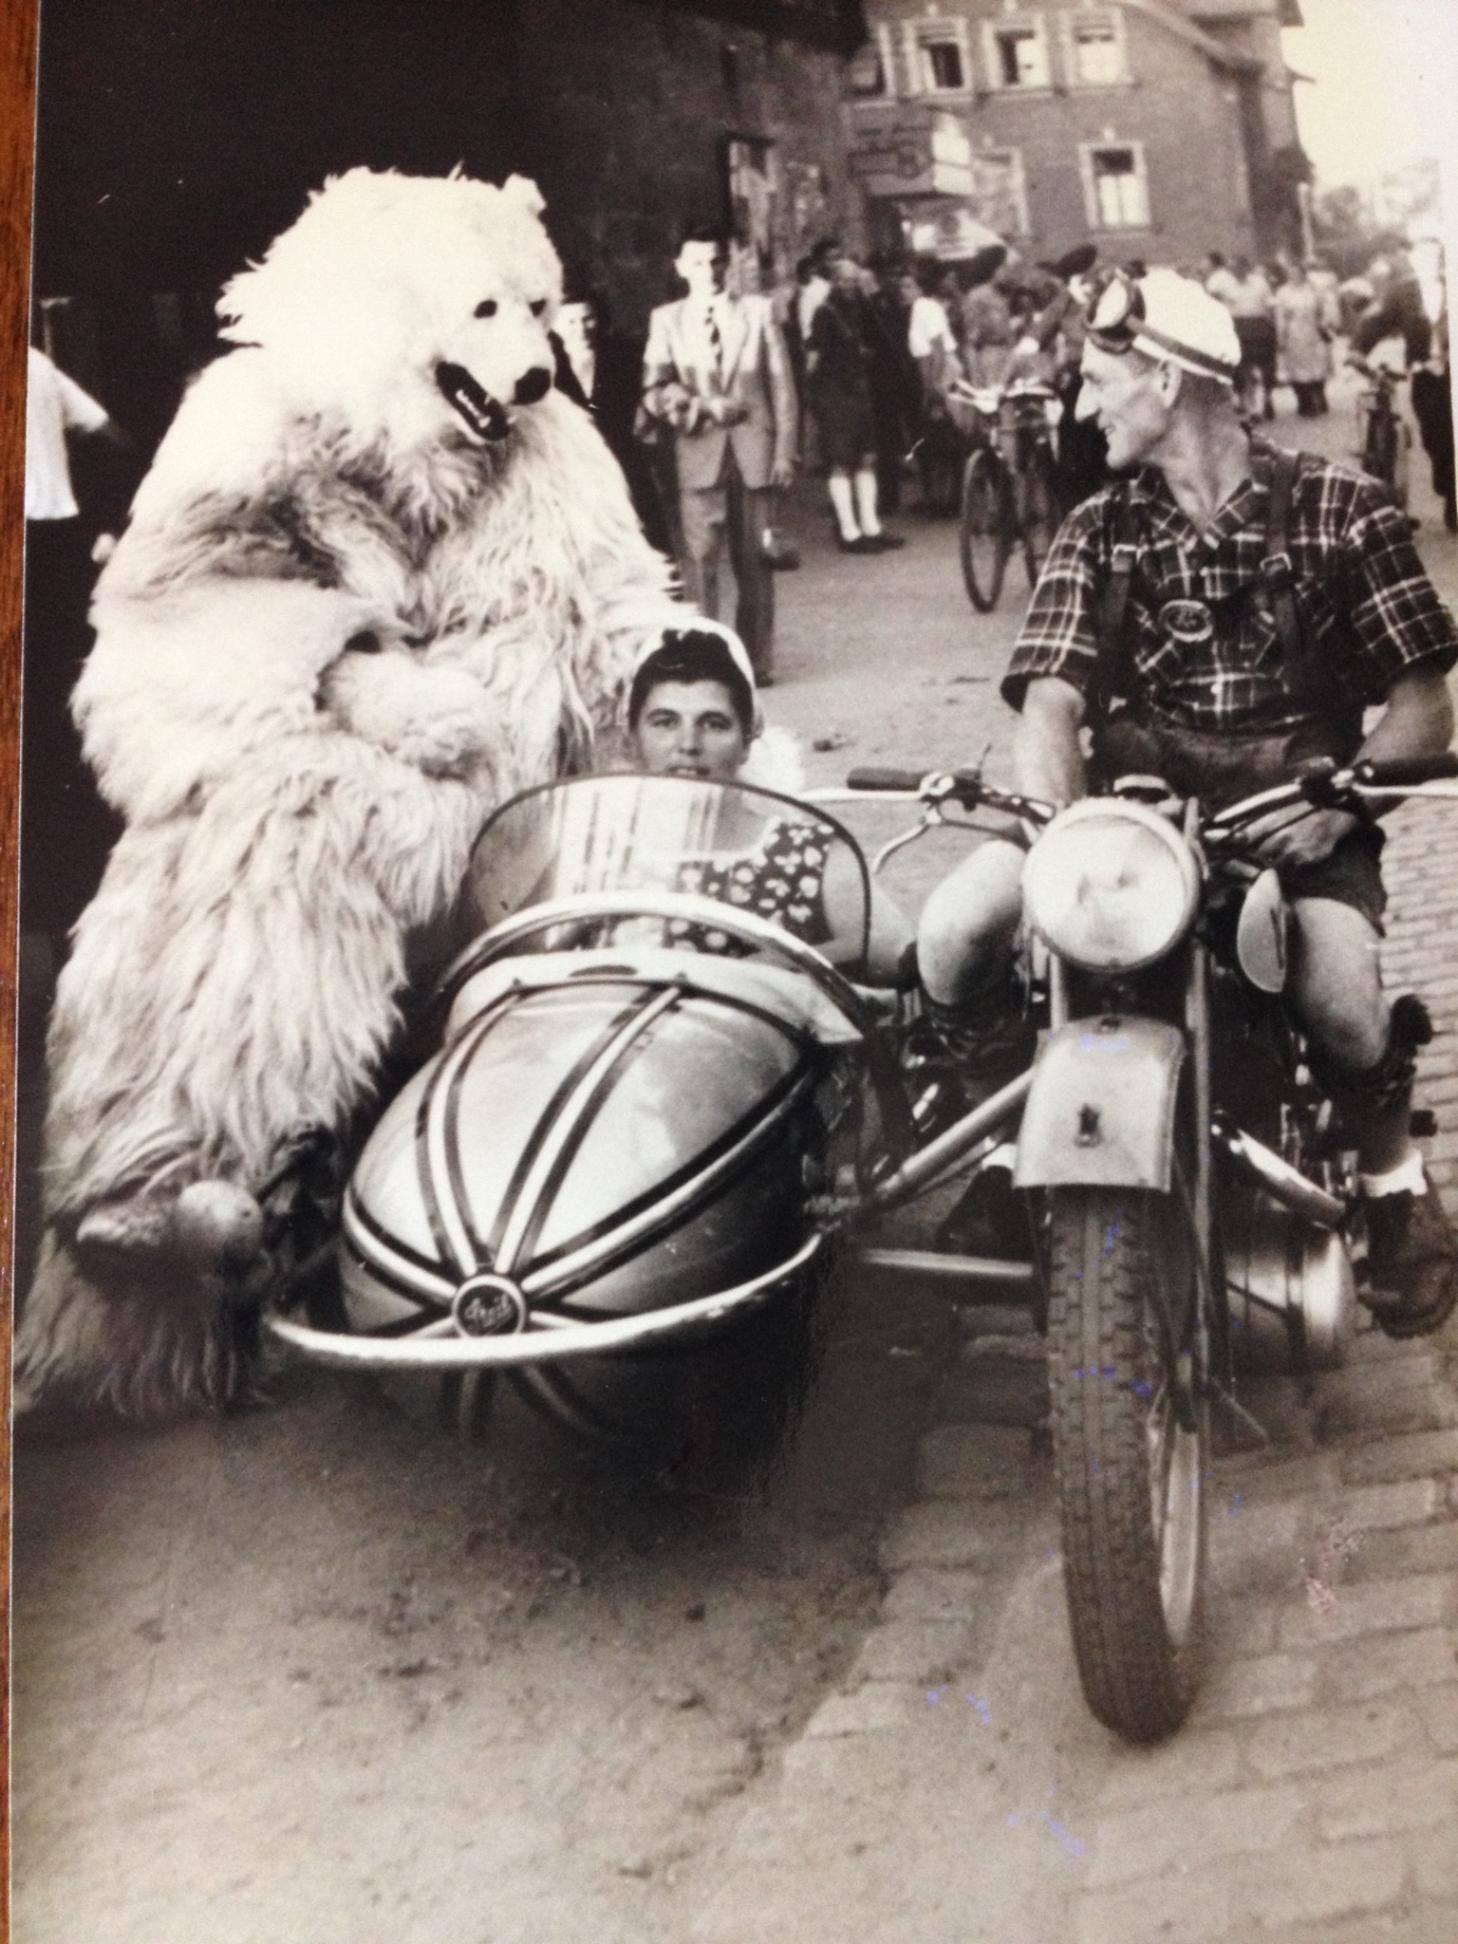 A polar bear sits in a sidecar with Facebook reader Nancy Skoyles Greenberg's great aunt